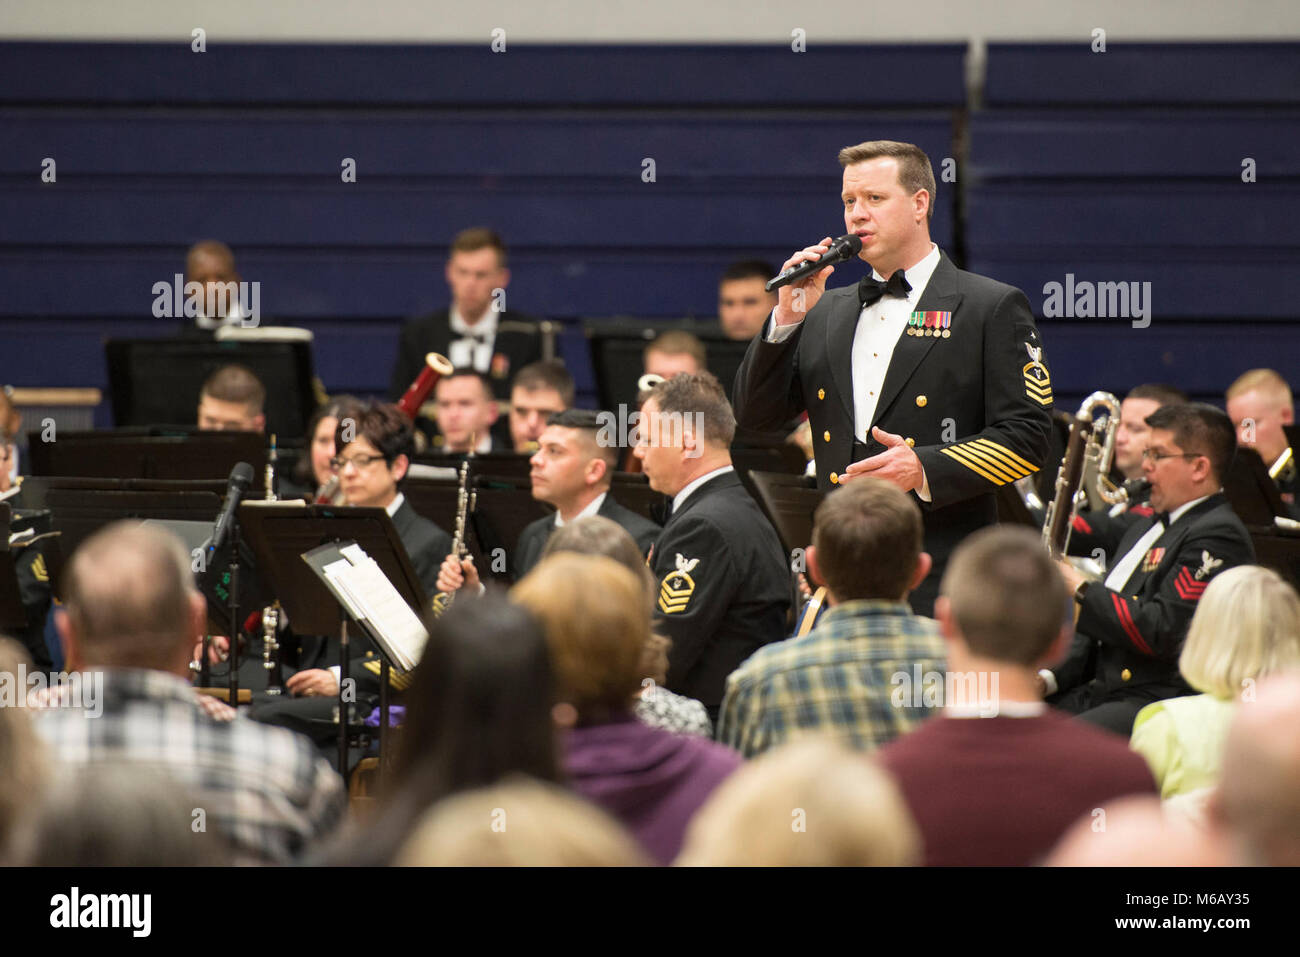 PRICE, Utah (Feb. 27, 2018) Senior Chief Musician Courtney Williams performs with the U.S. Navy Band during a concert at Utah State University Eastern in Price, Utah. The Navy Band performed in 12 states during its 21-city, 5,000-mile tour, connecting communities across the nation to their Navy. (U.S. Navy Stock Photo